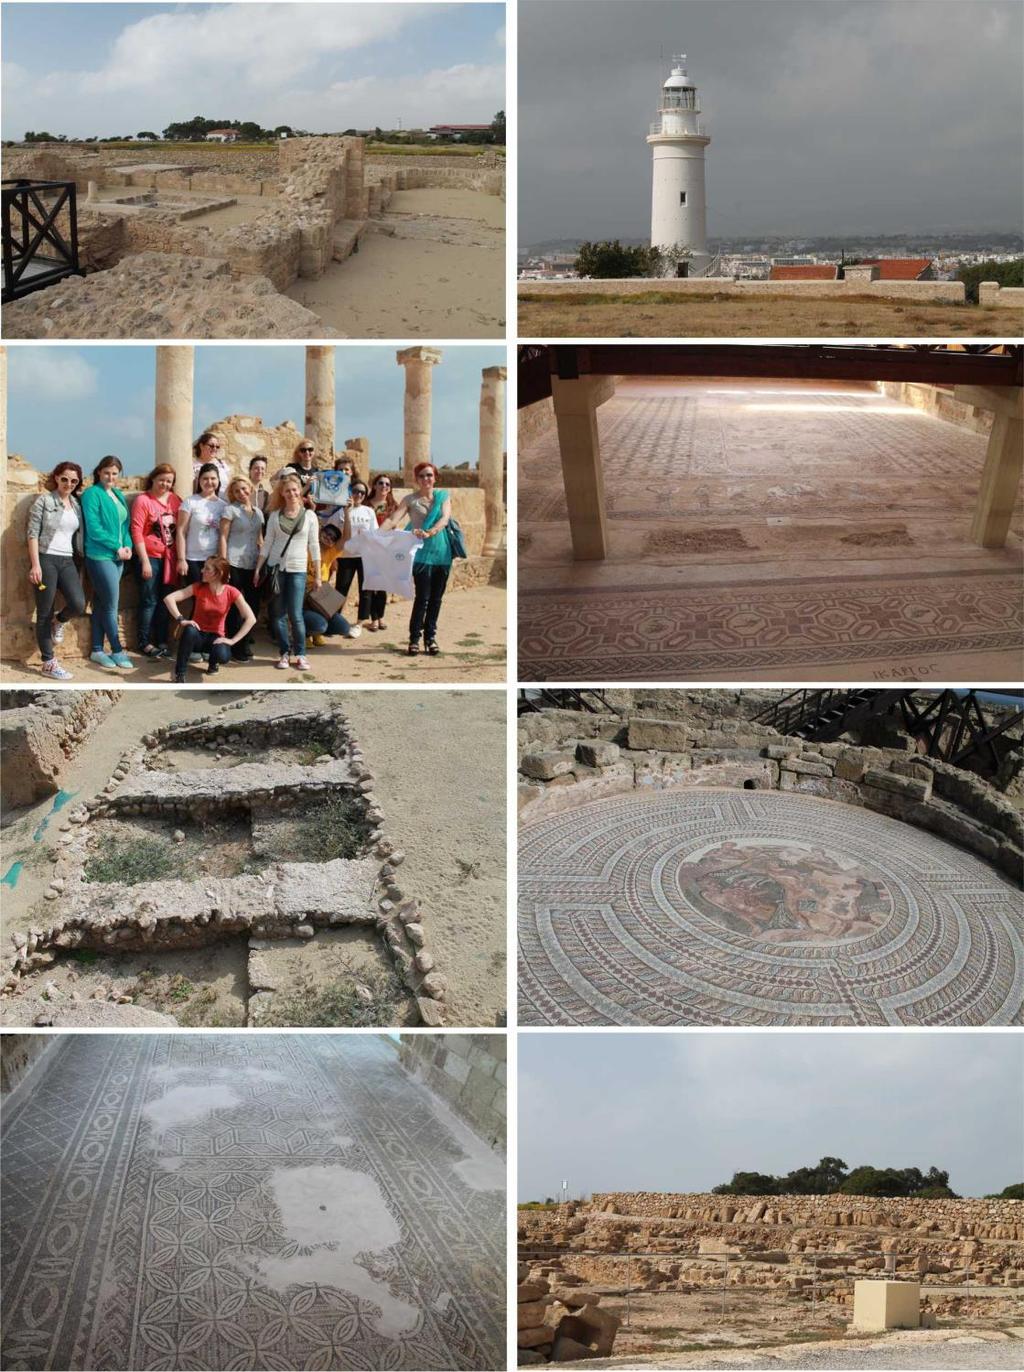 The Paphos archeological site UNESCO Heritage The mosaics and ruins